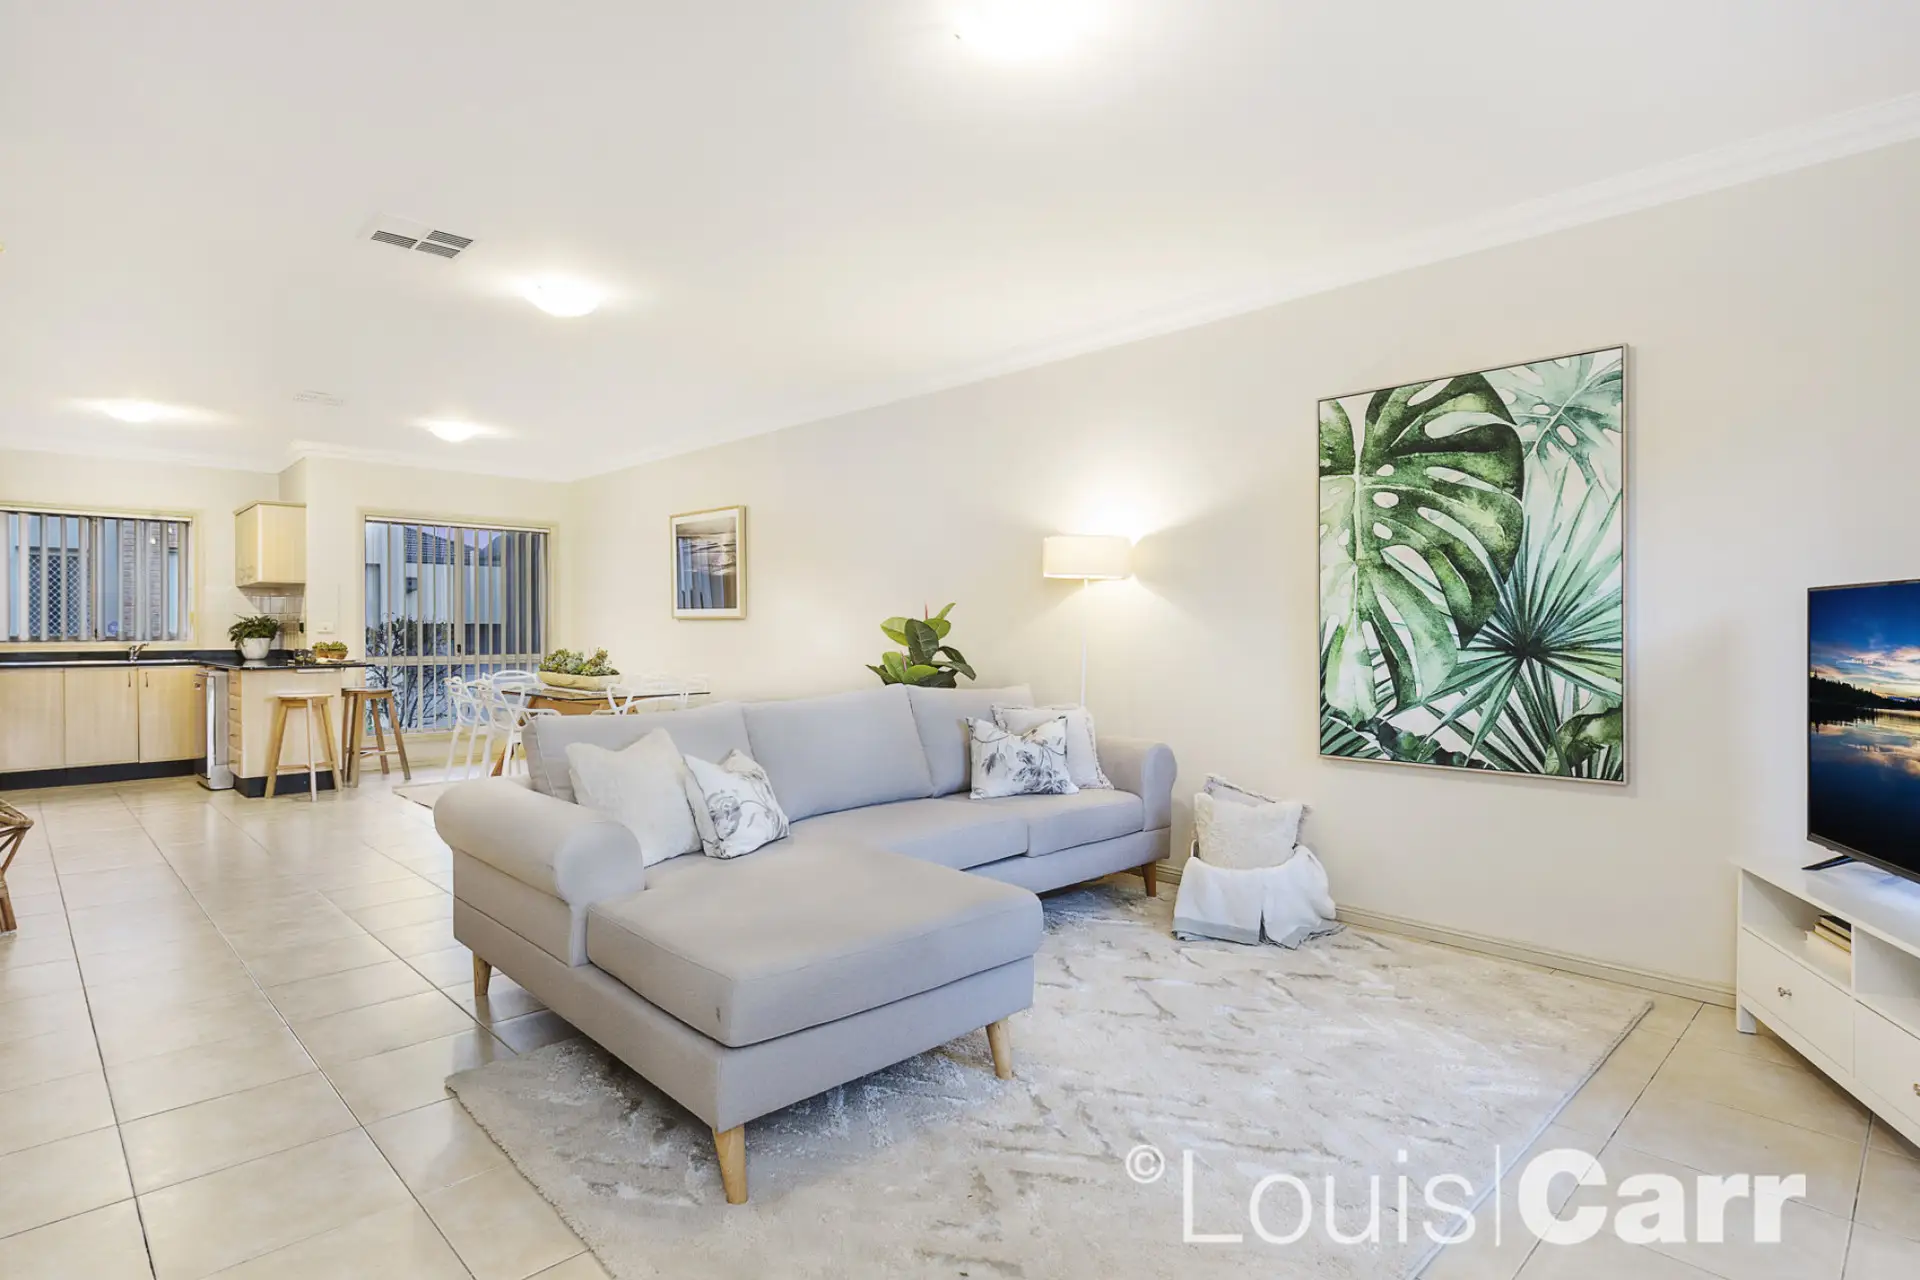 Photo #6: 14/83-93 Railway Street, Baulkham Hills - Sold by Louis Carr Real Estate